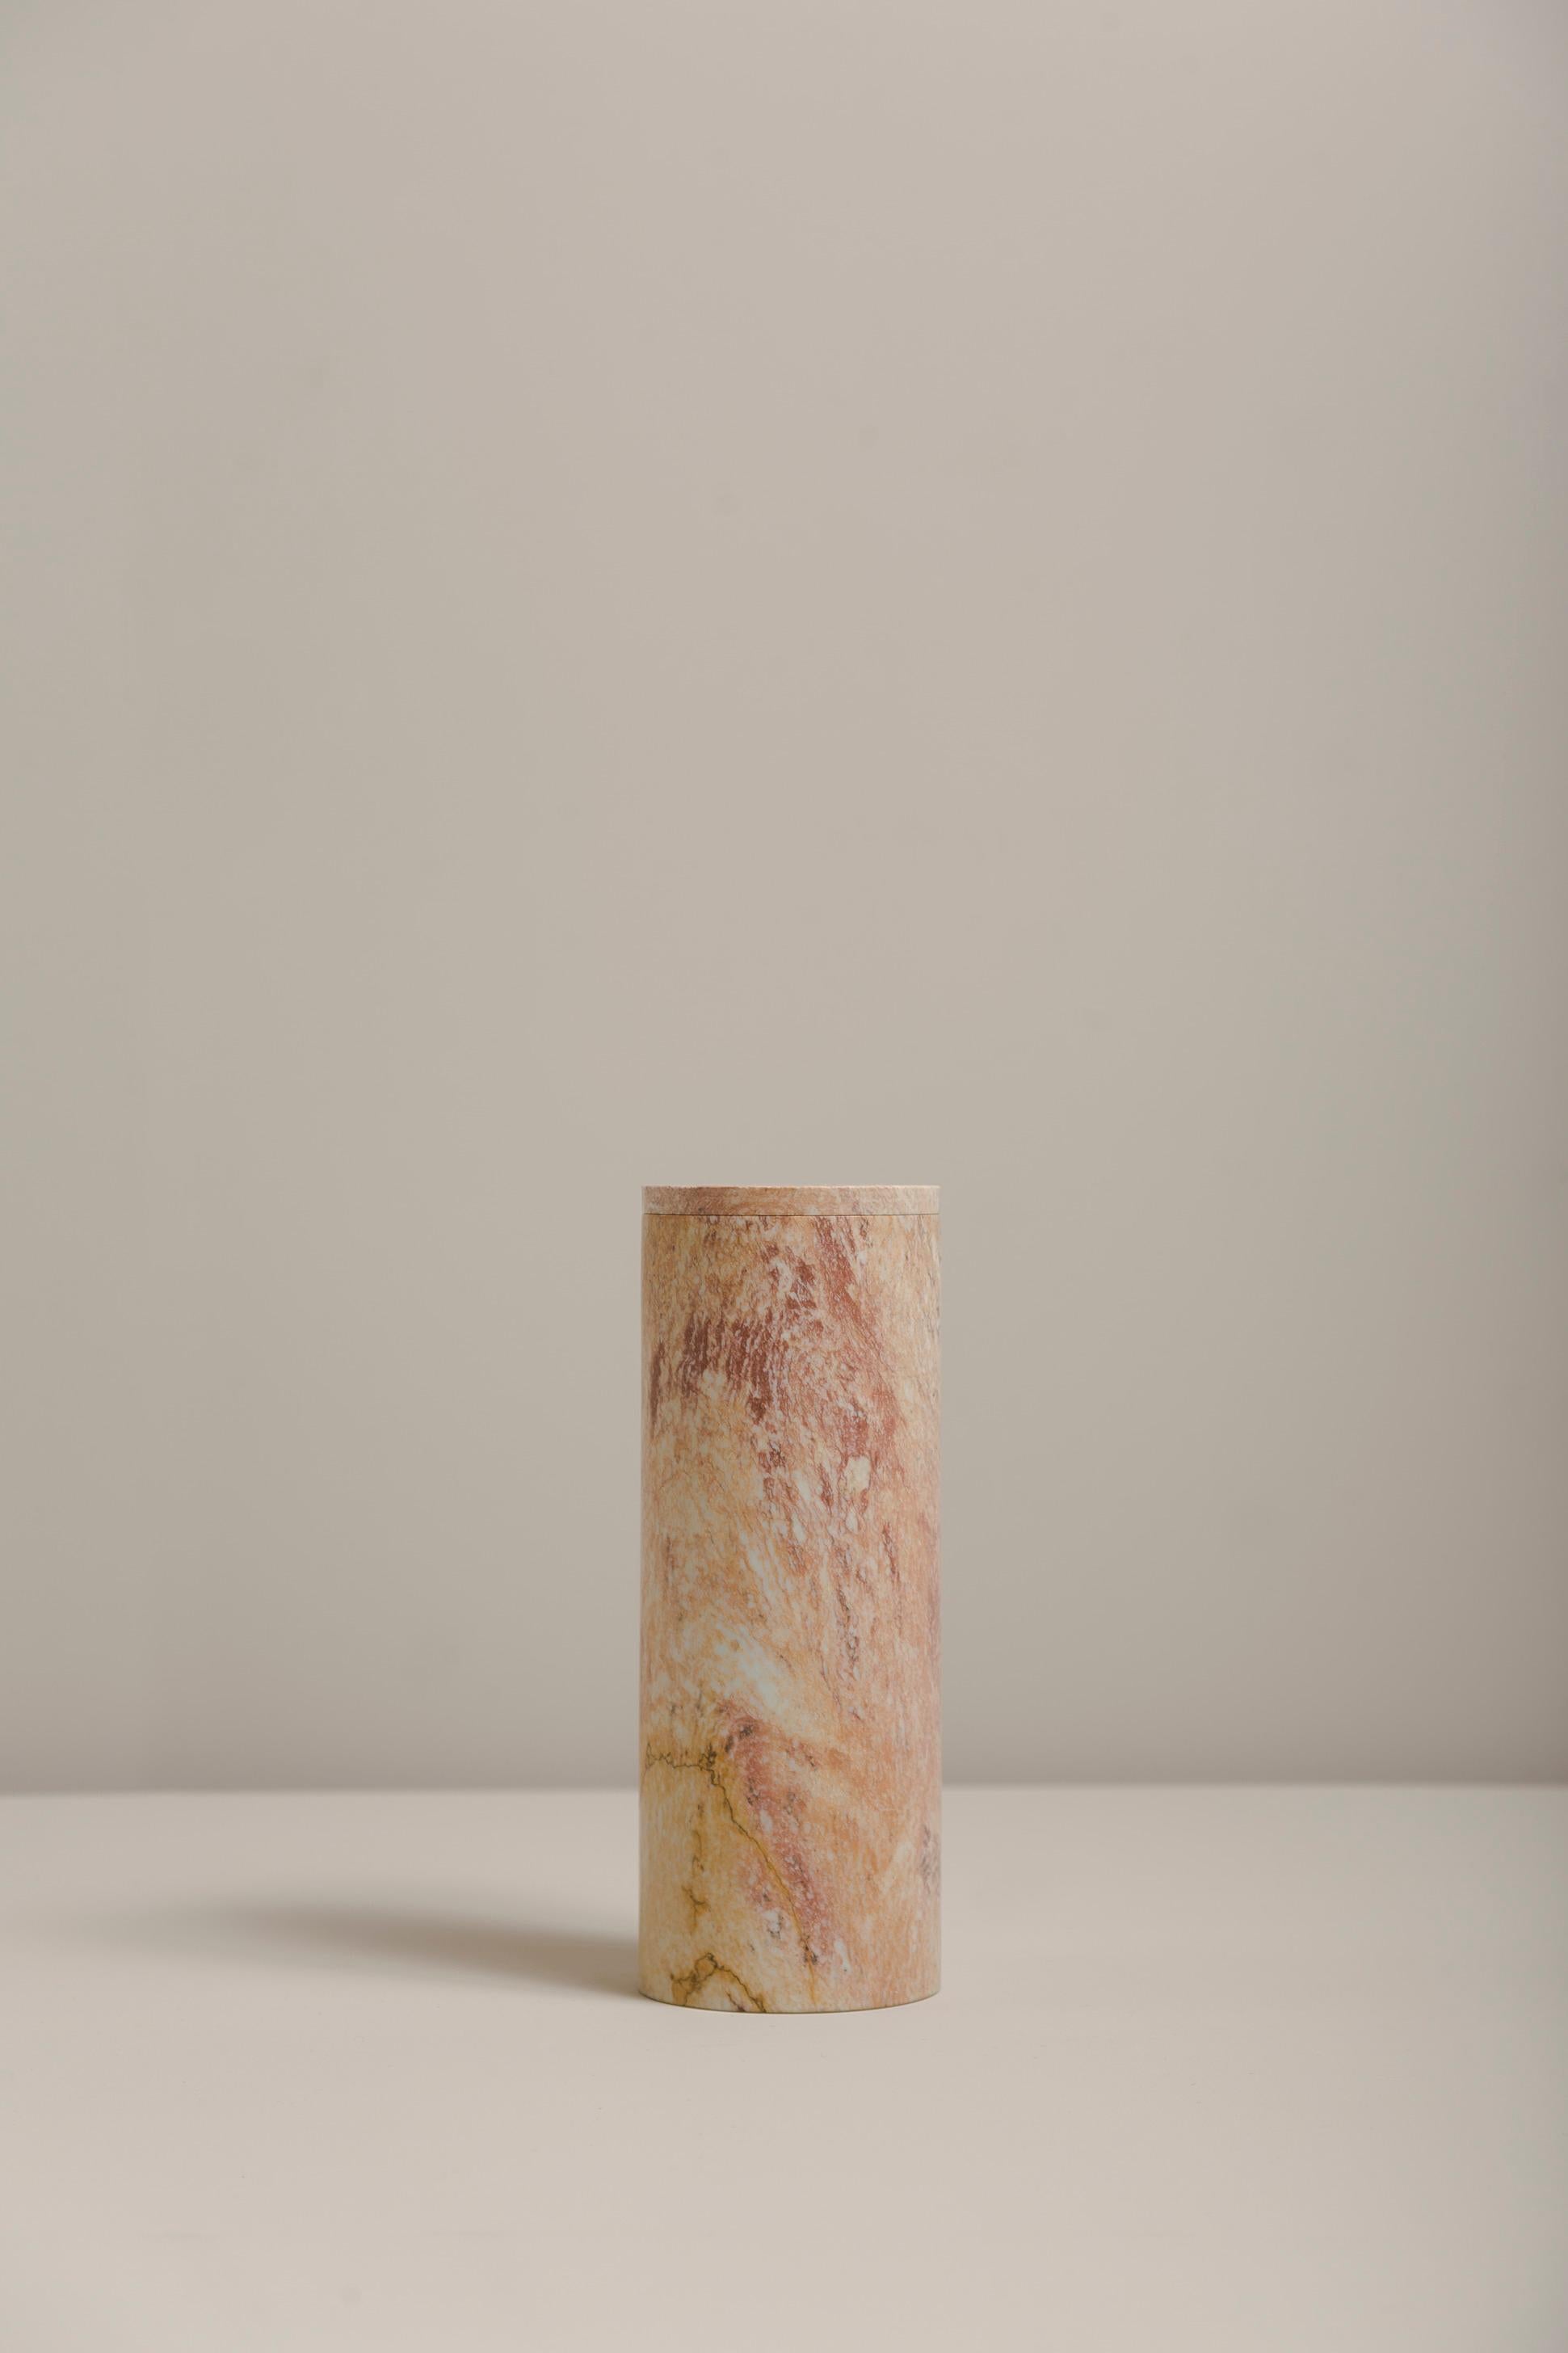 Monolith by Bravo Studio
Monolith BBB1
Materials: Cobarbalita stone
Dimensions: Ø 7.5 × 20 cm

 
Monolithic objects in Cobarbalita stone
This new series of objects developed by the Chilean design studio bravo! Continues with the logic of